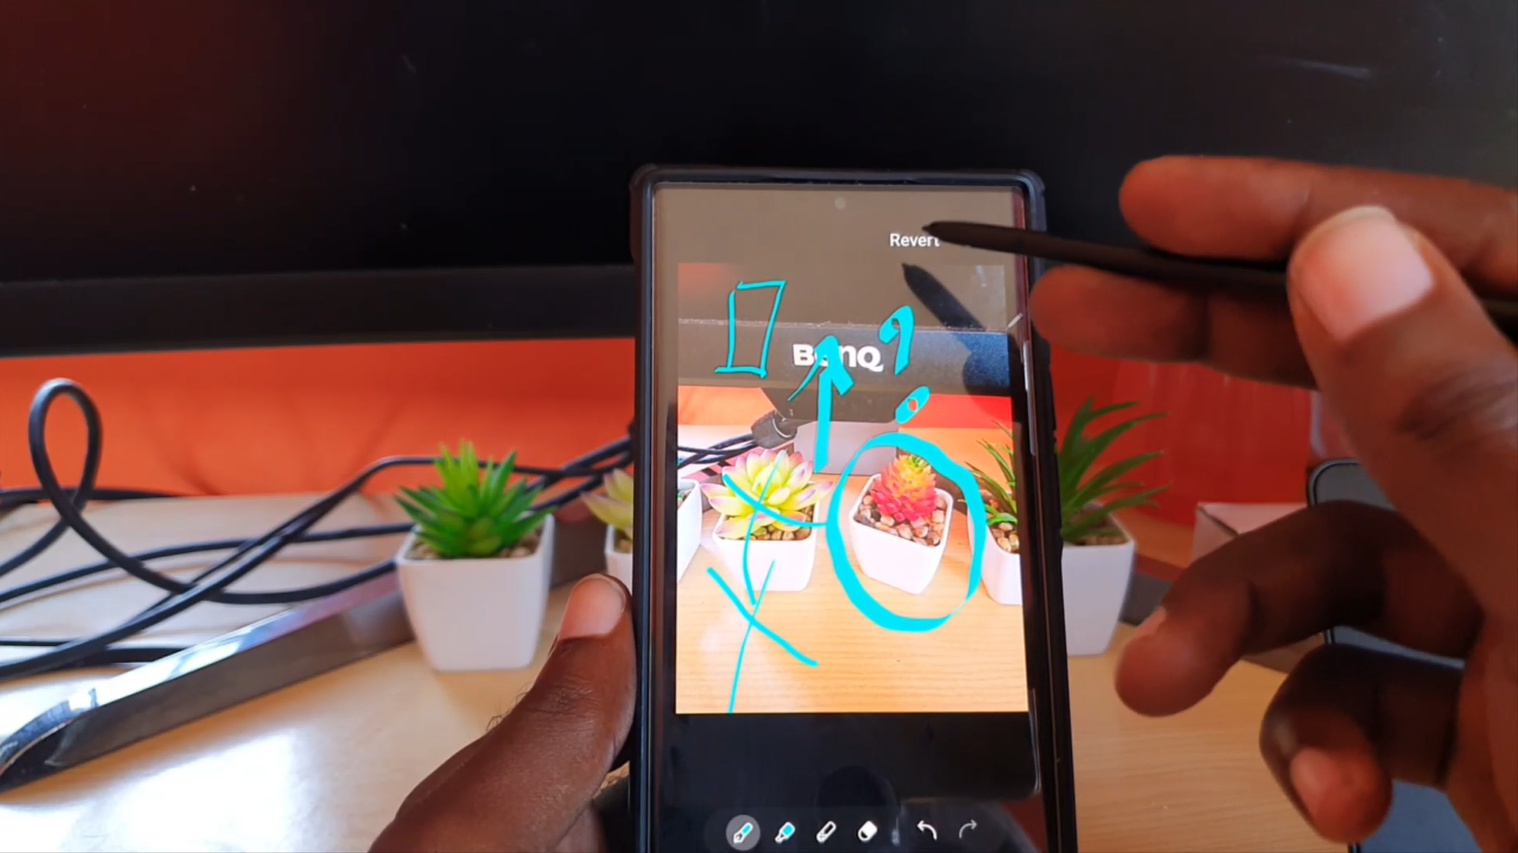 How to Draw on a Picture on Samsung Phone BlogTechTips